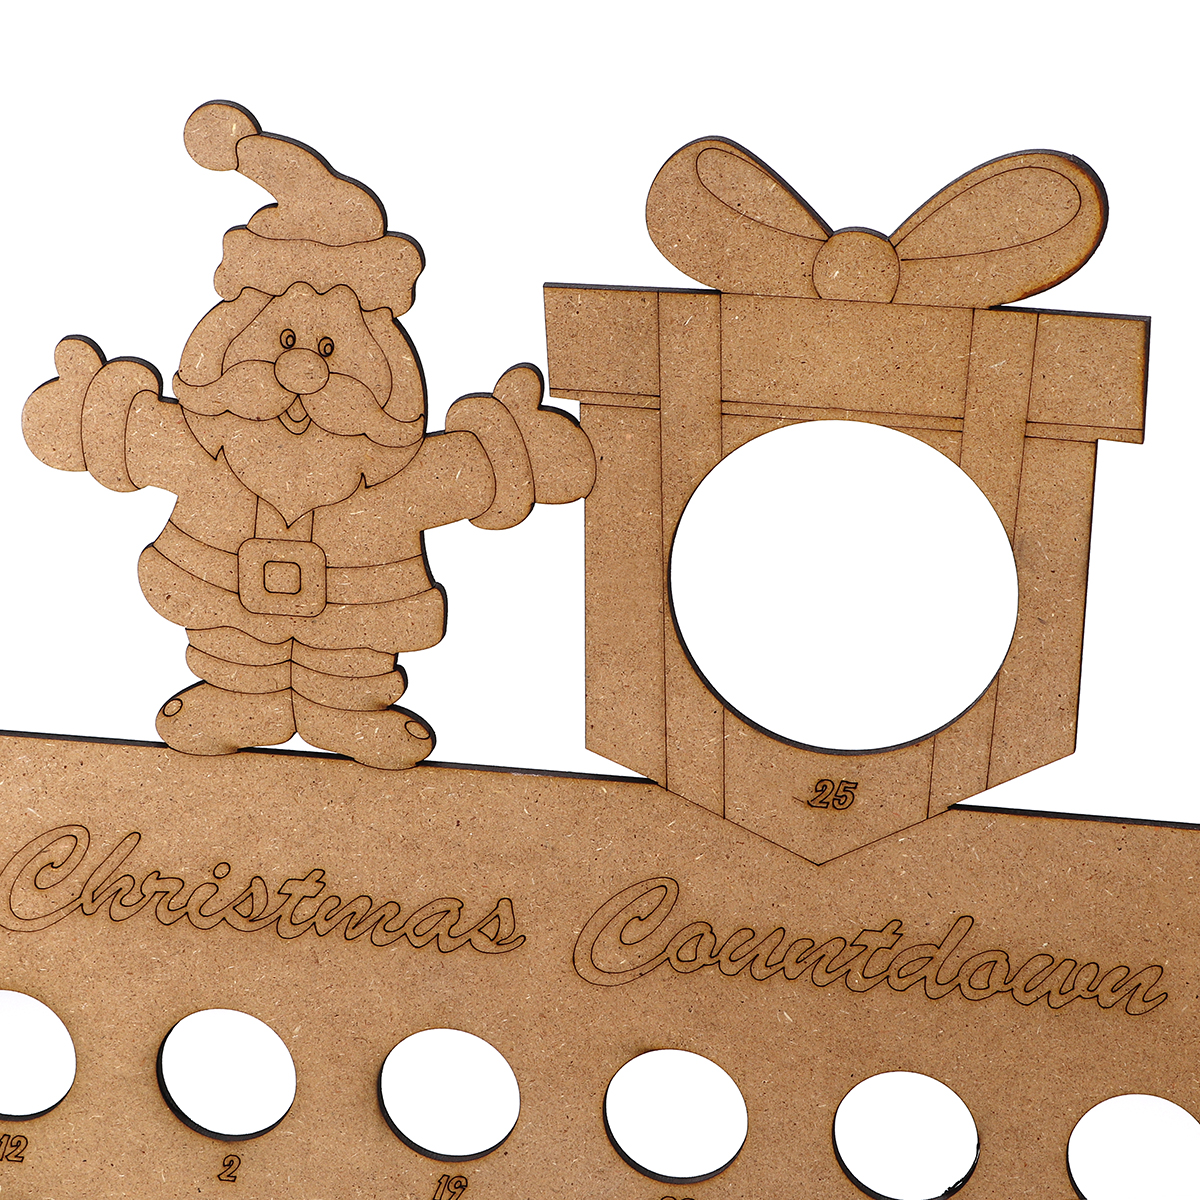 Wooden-Christmas-Advent-Calendar-Christmas-Claus-Decoration-Fits-25-Circular-Chocolates-Candy-Stand--1587875-7